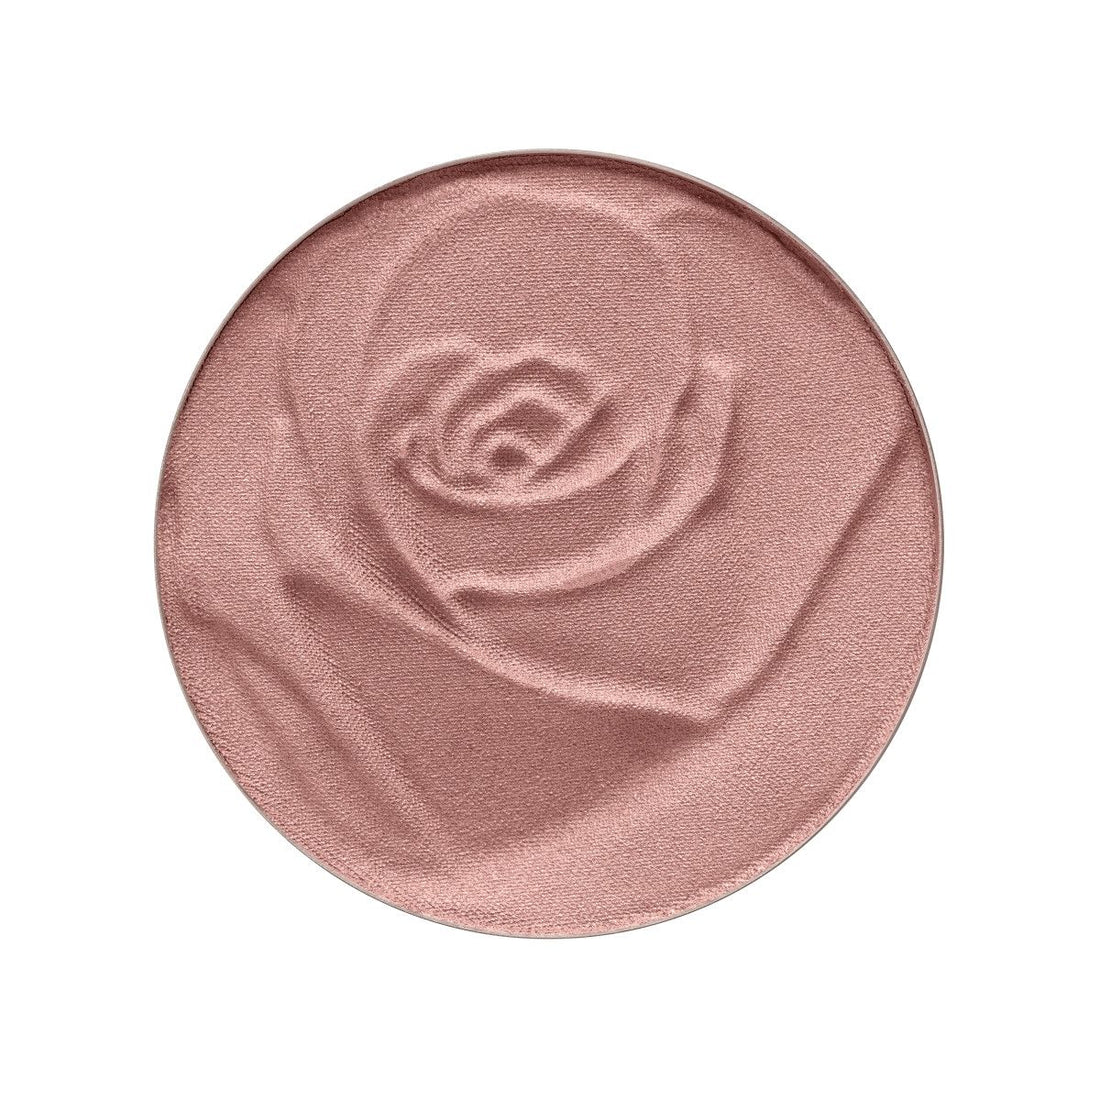 ROSÉ ALL DAY SET & GLOW- BRIGHTENING ROSE